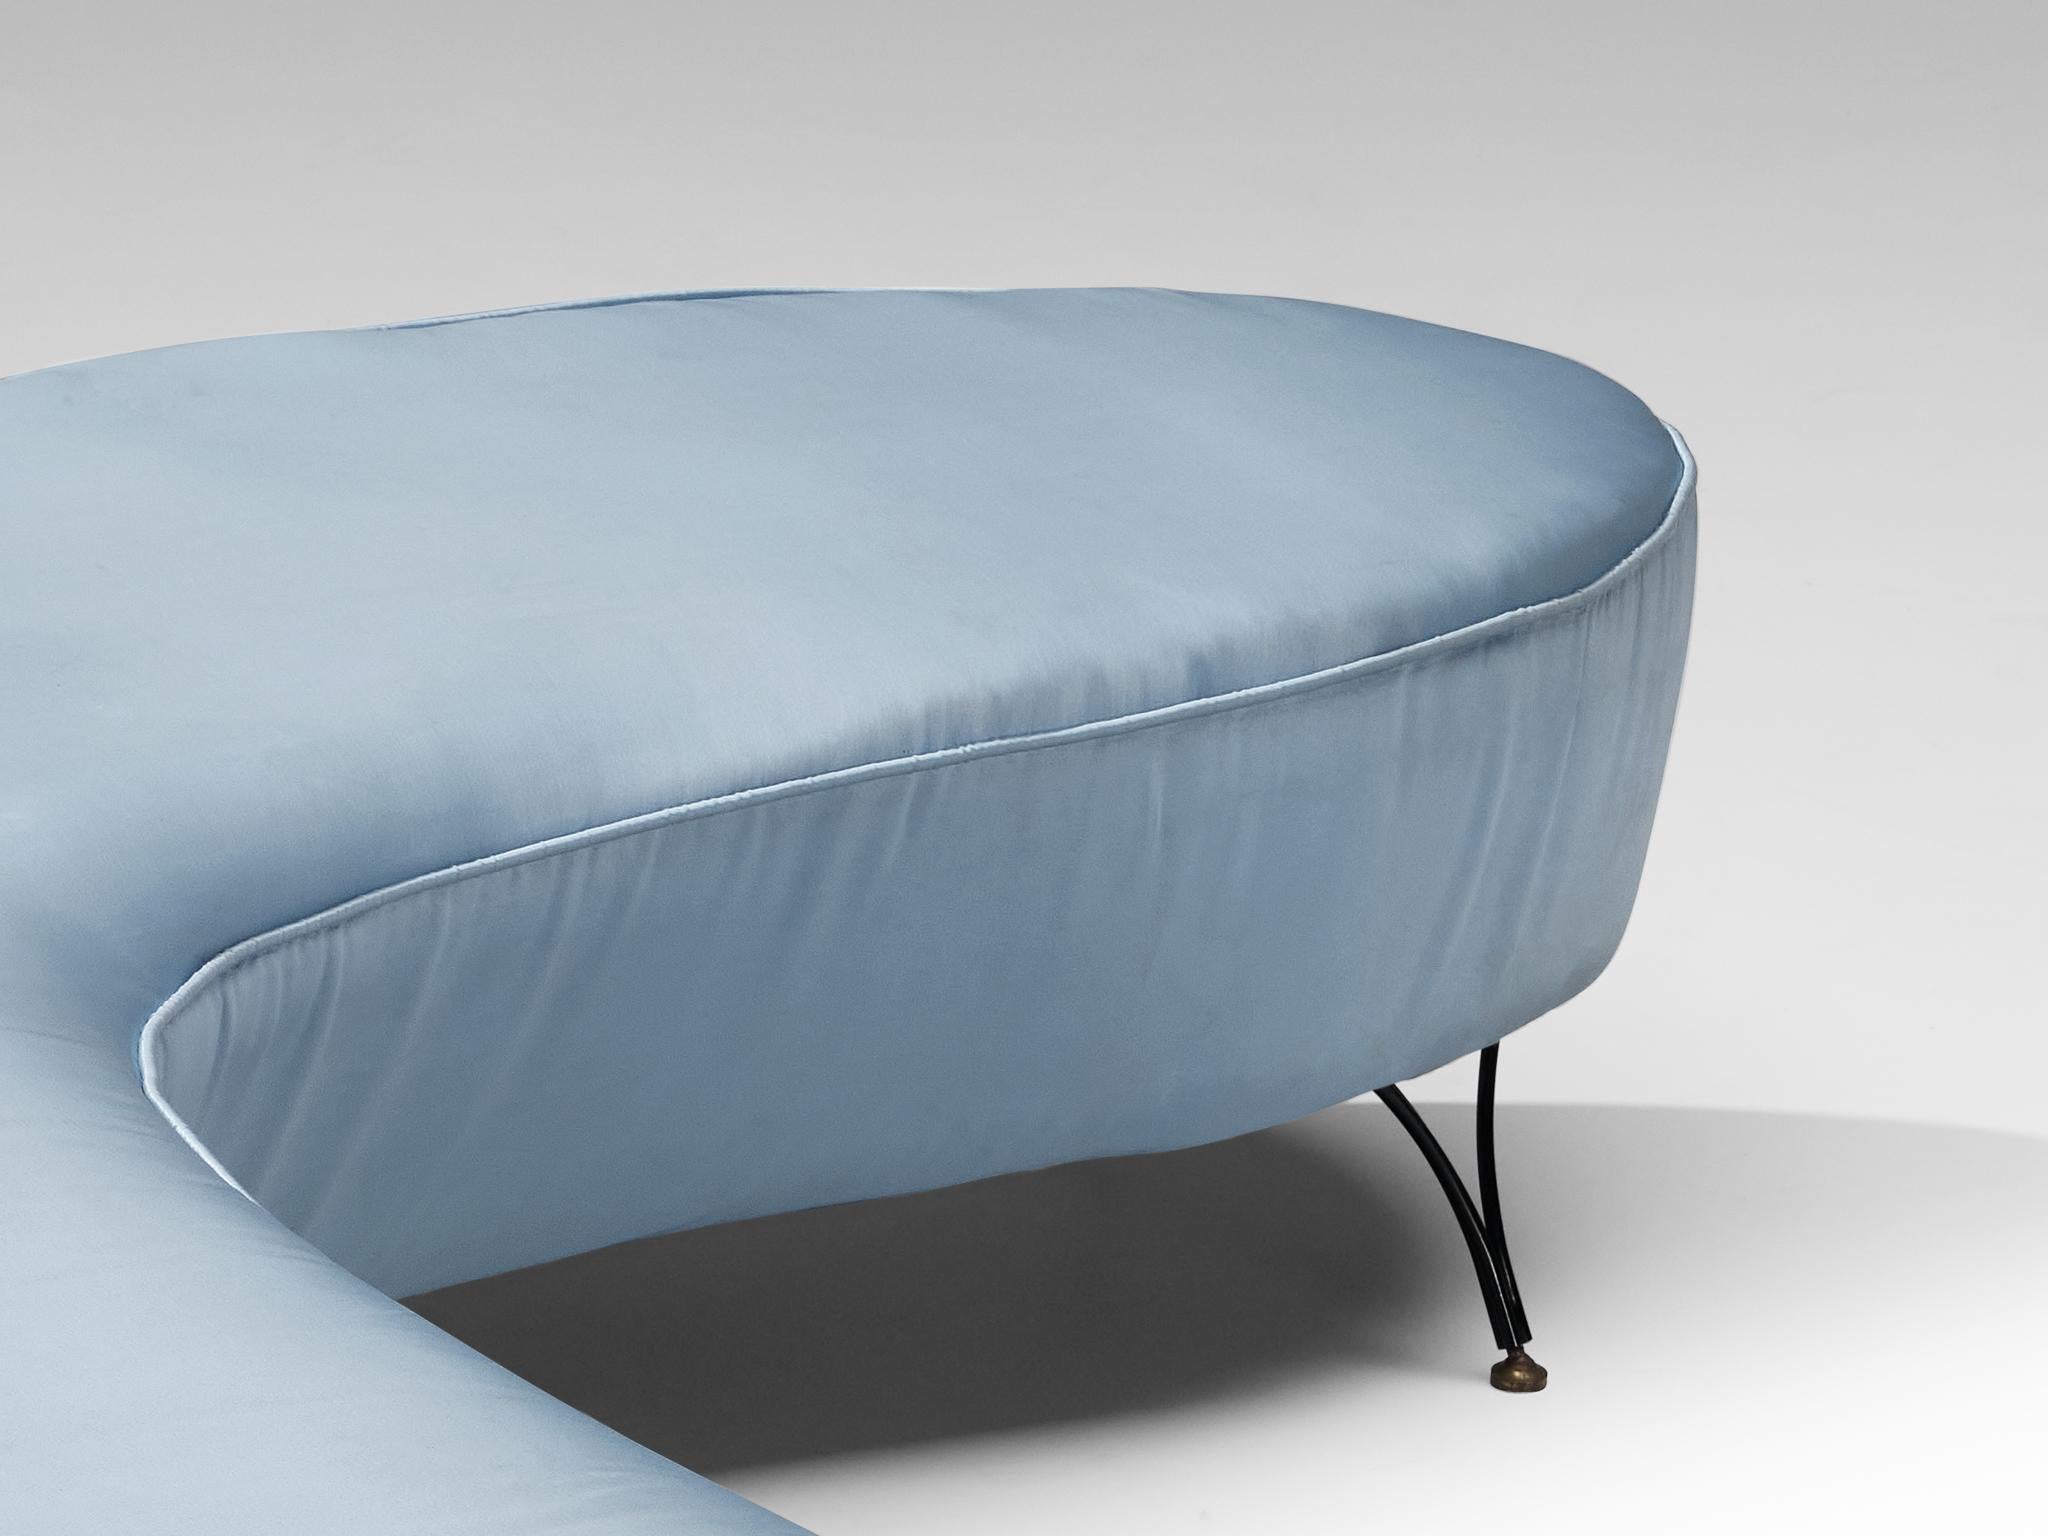 Laiton Canapé italien Freeform Curved Sofa in Light Blue Upholstery en vente